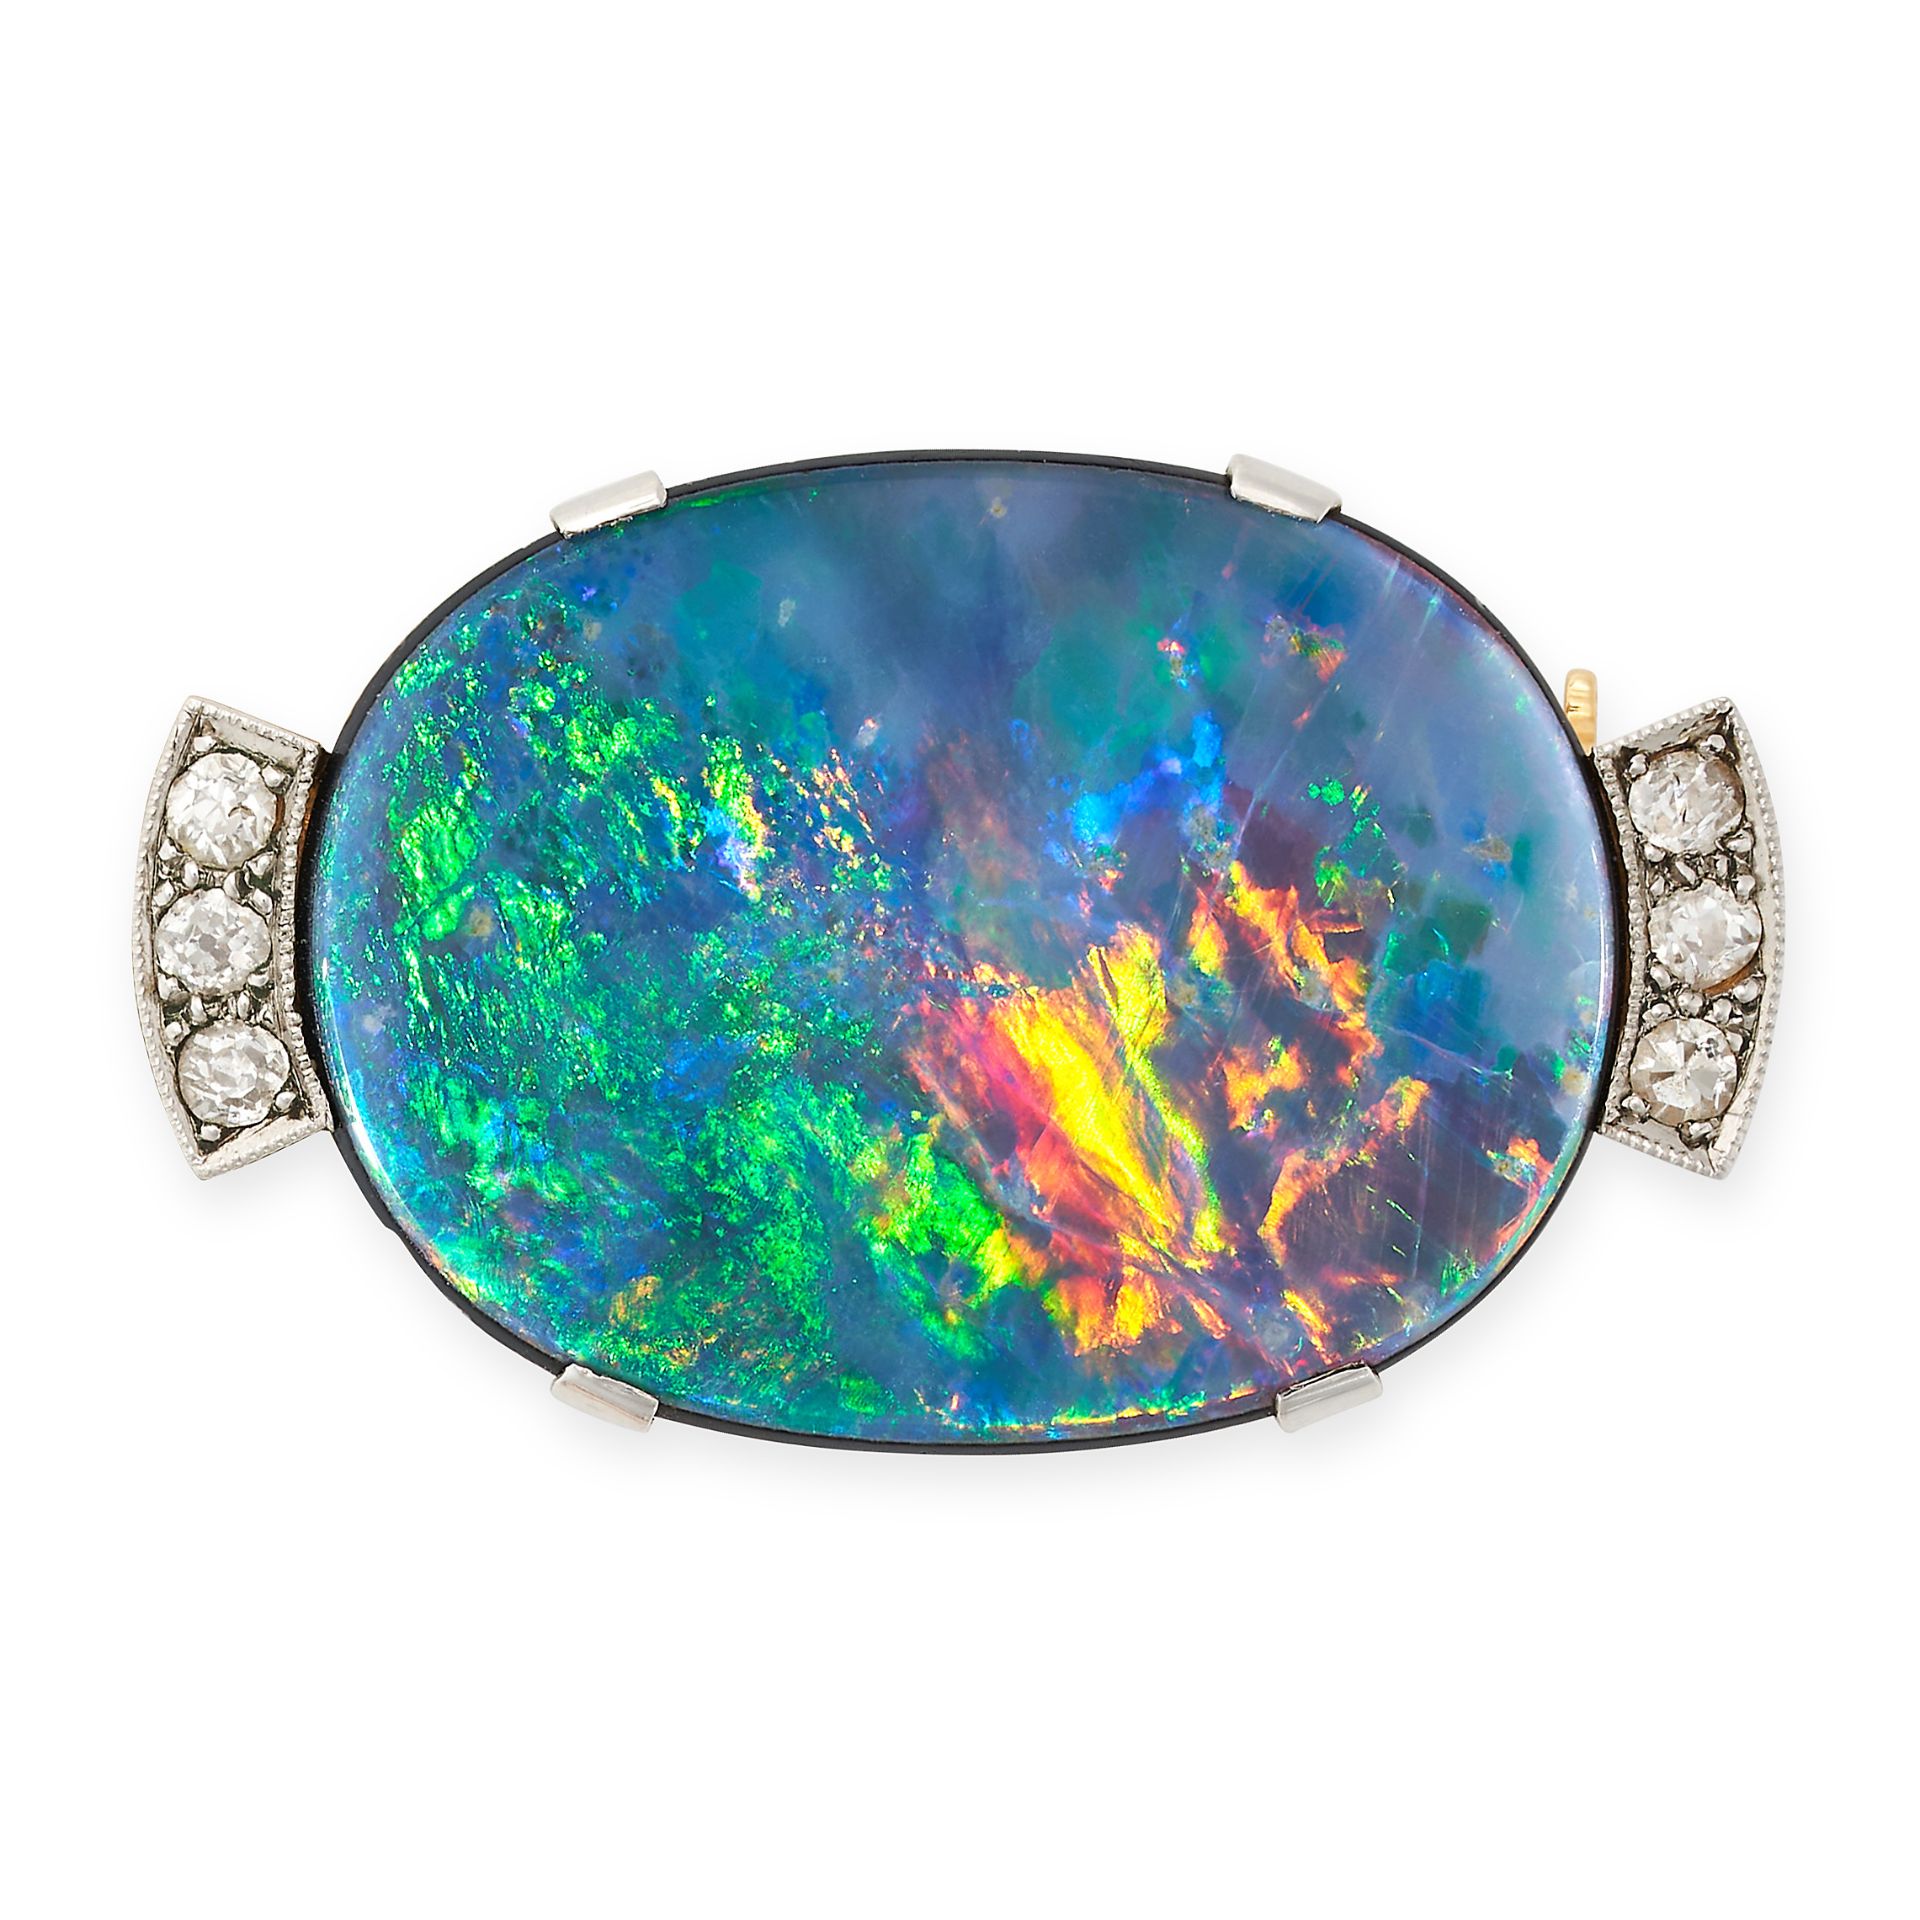 A BLACK OPAL DOUBLET AND DIAMOND BROOCH in 18ct yellow and white gold, set with a black opal doub...